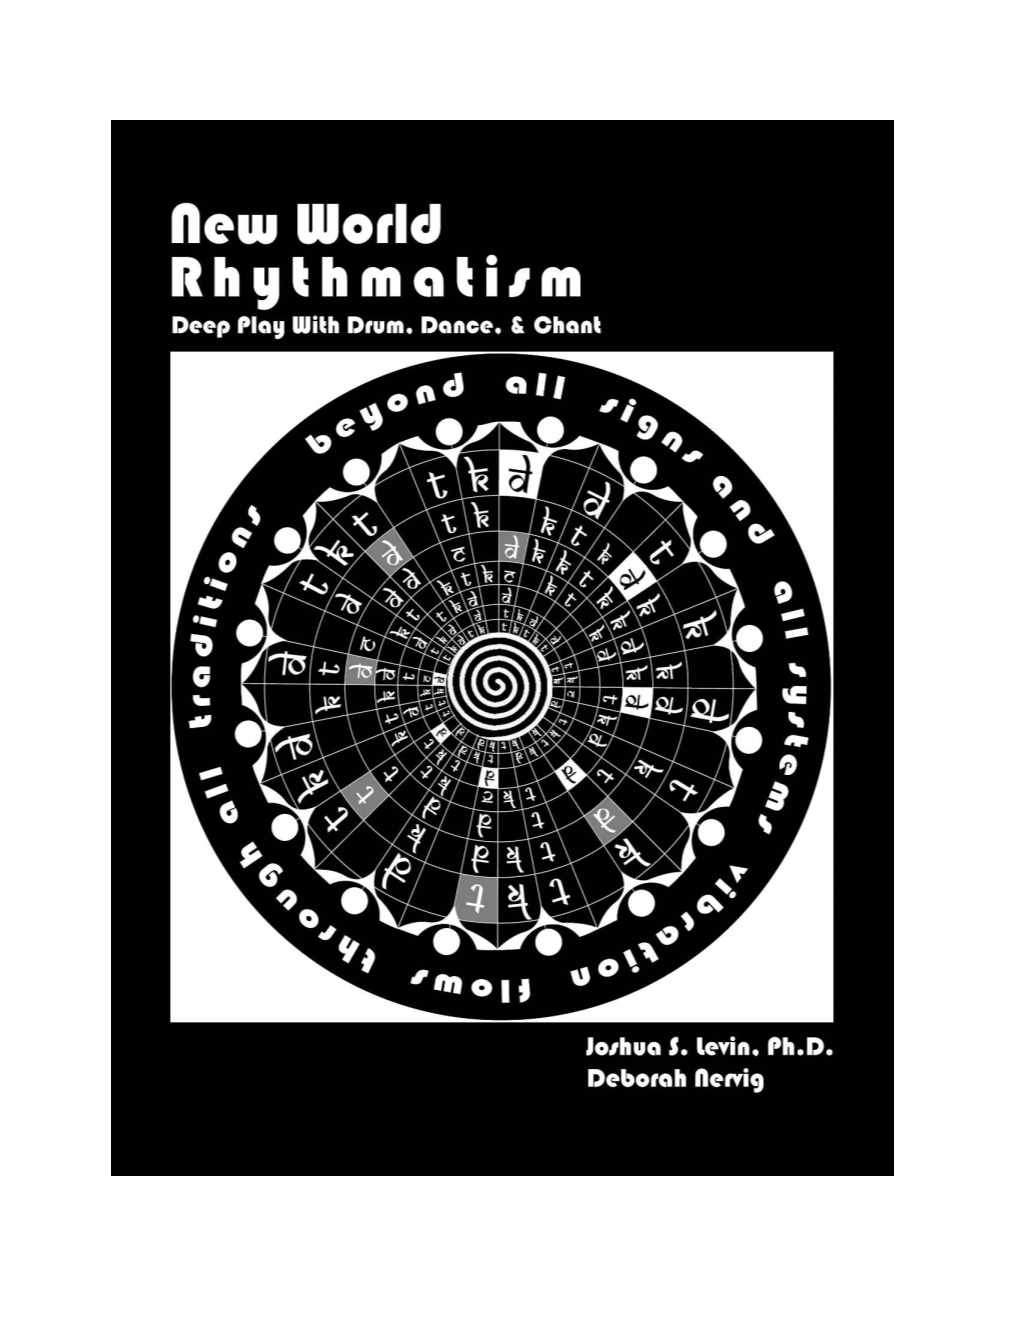 Introduction to New World Rhythmatism